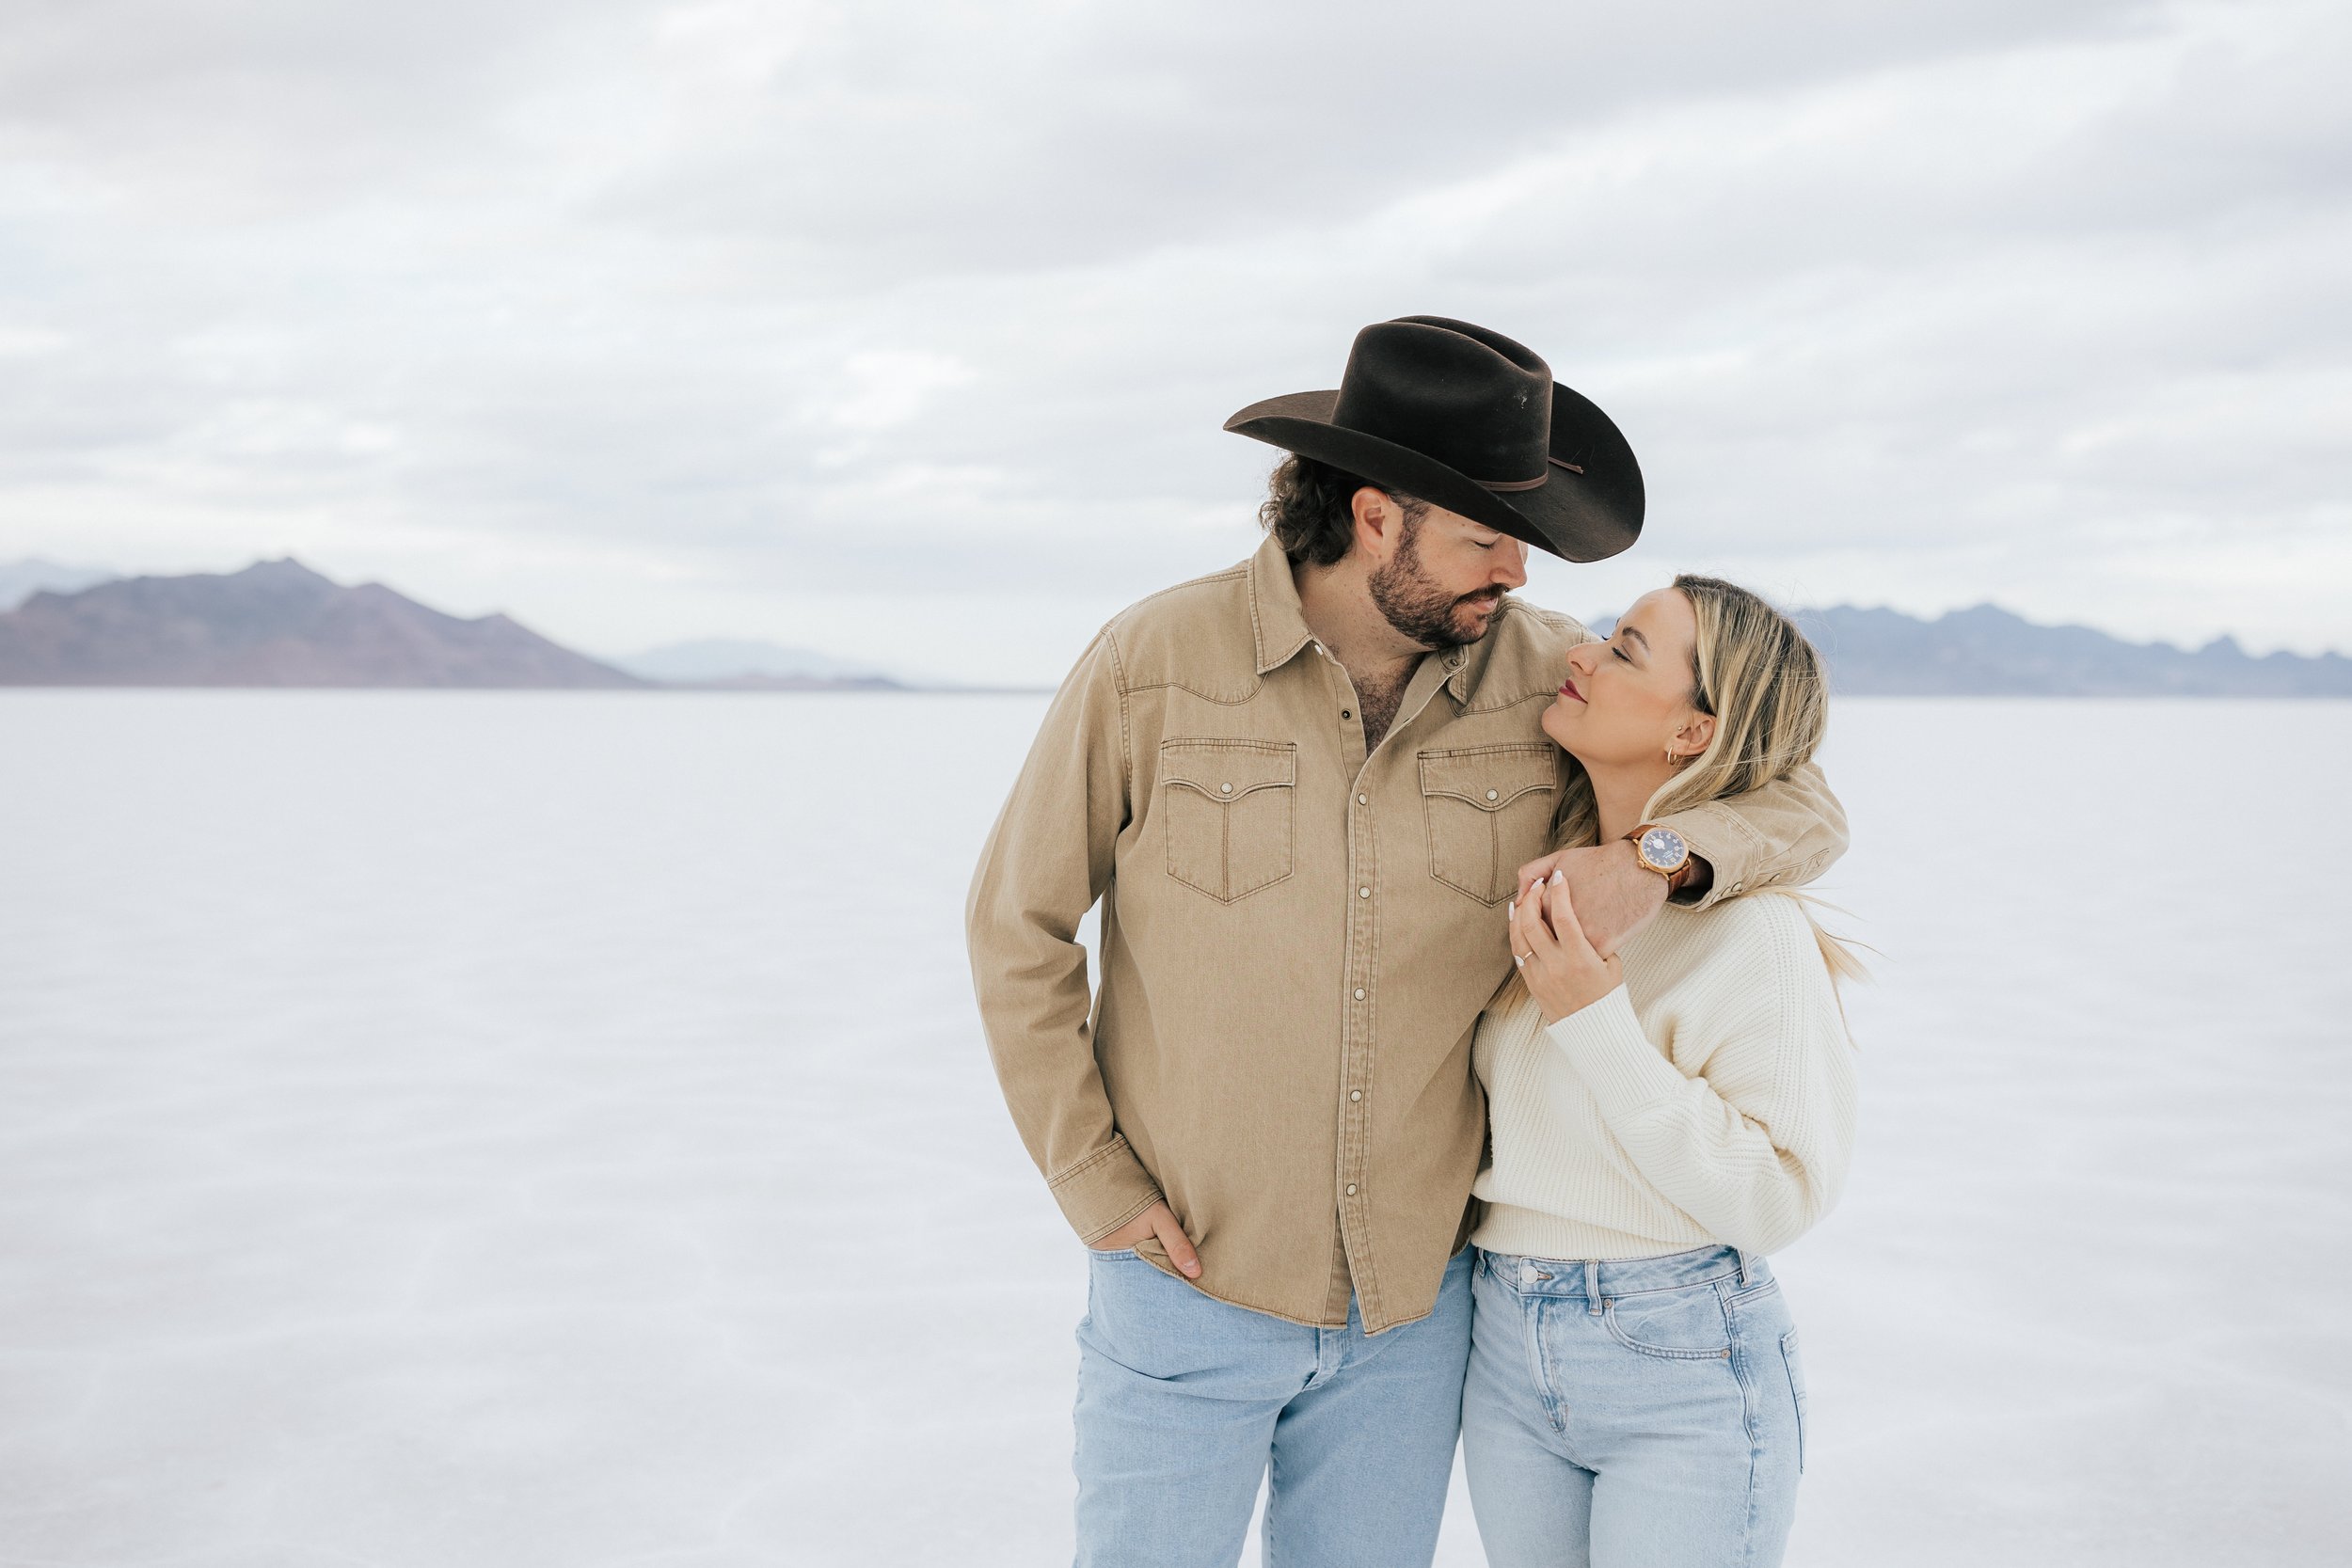  An engaged couple laughs and hugs as they pose for a photo at the Bonneville Salt Flats near Wendover, Nevada and Salt Lake City, Utah. The man is wearing a cowboy hat as they look at each other. The Salt Flats are white and the sky is overcast. The